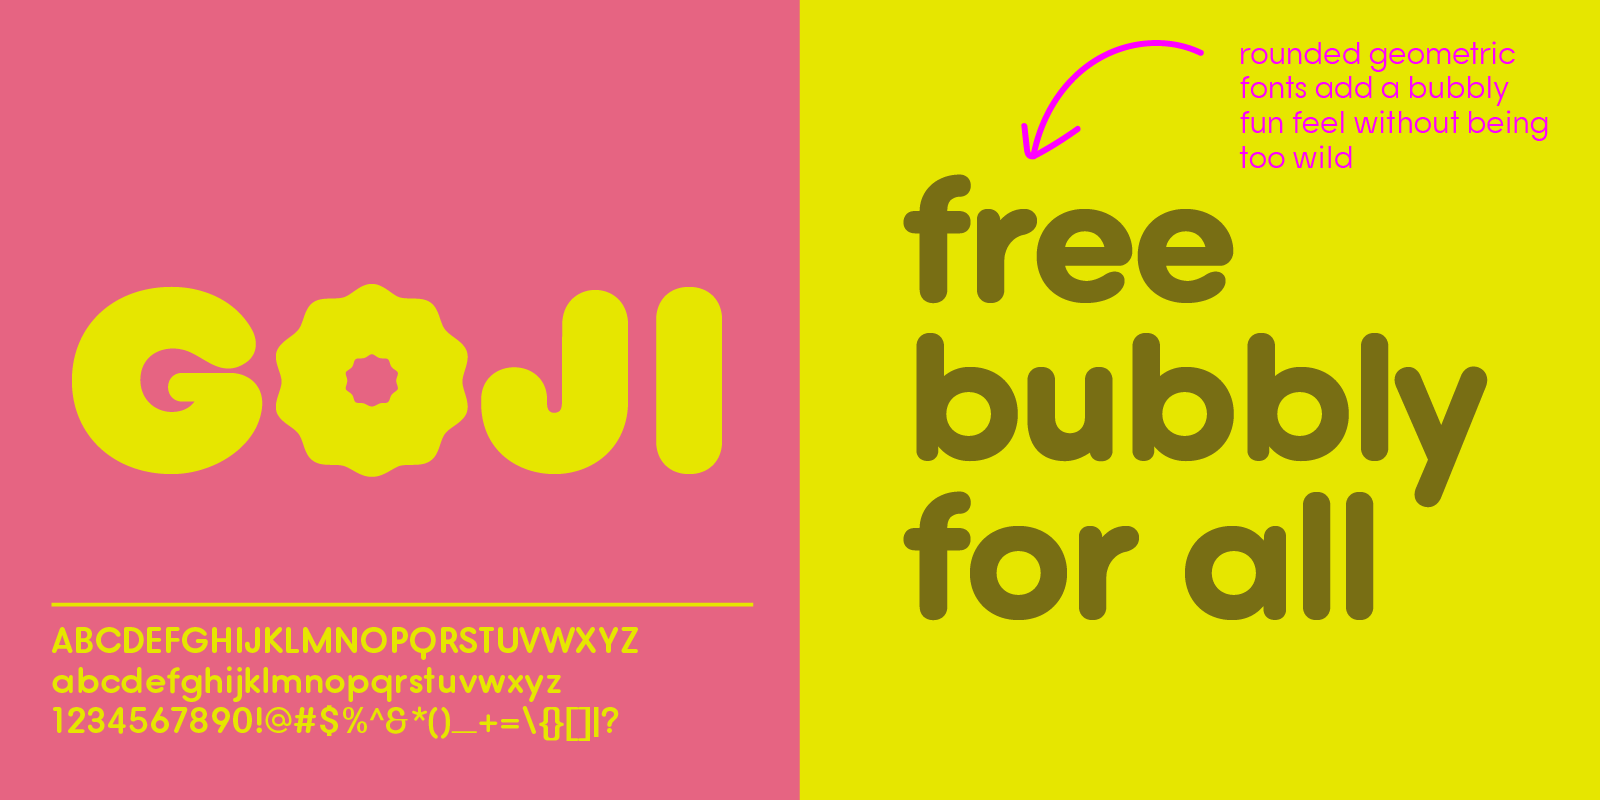 rounded geometric fonts add a bubbly fun feel without being too wild